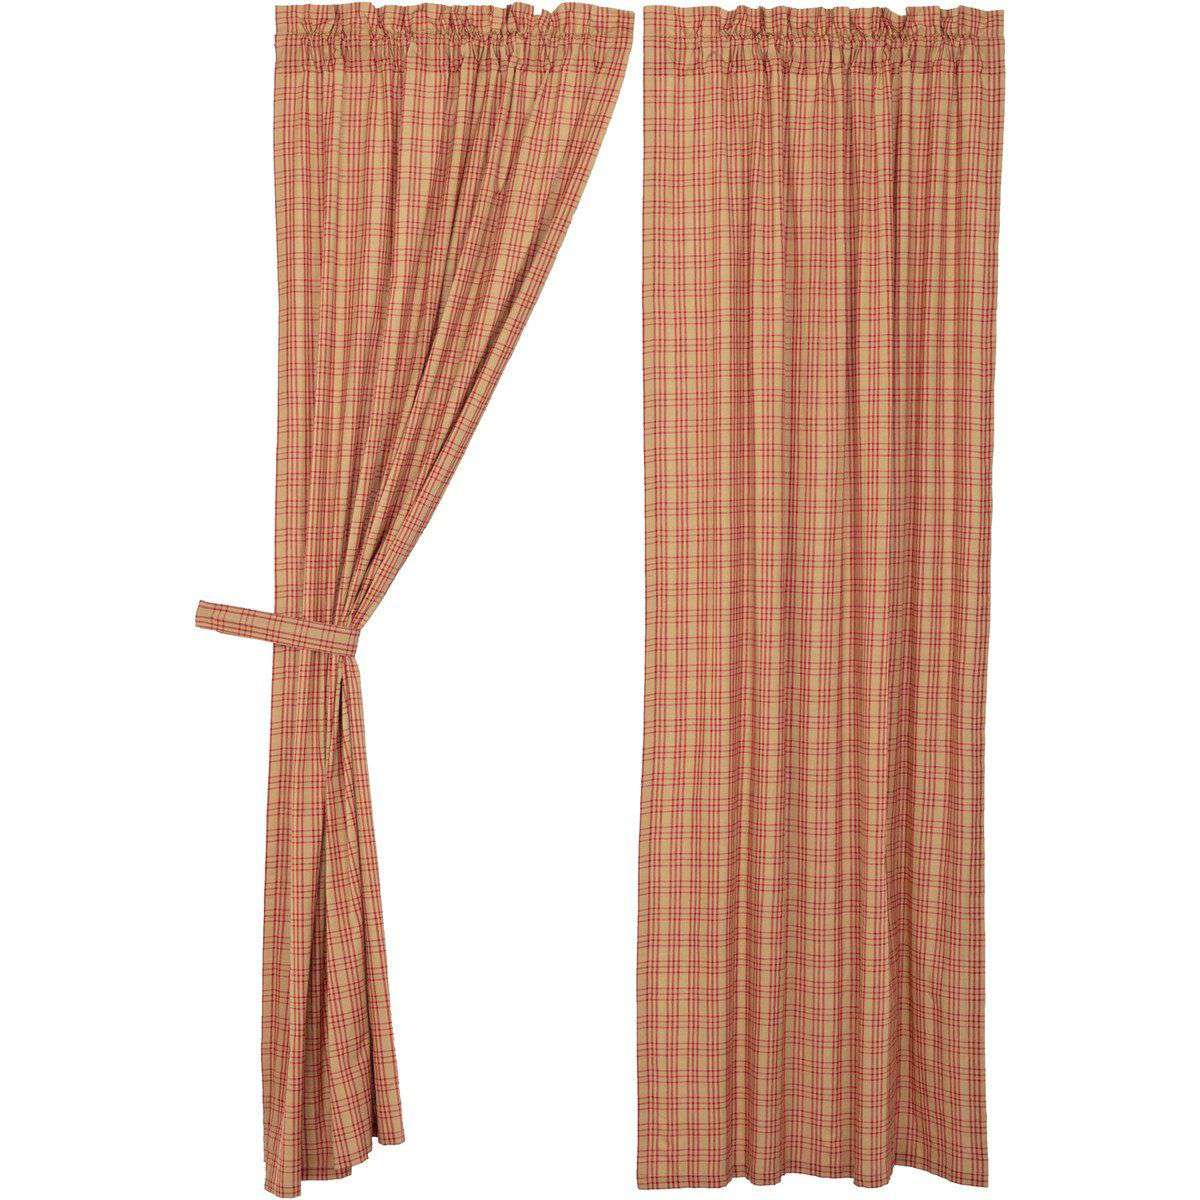 Sawyer Mill Charcoal/Blue/Red Plaid Panel Curtain Set of 2 84x40 - The Fox Decor